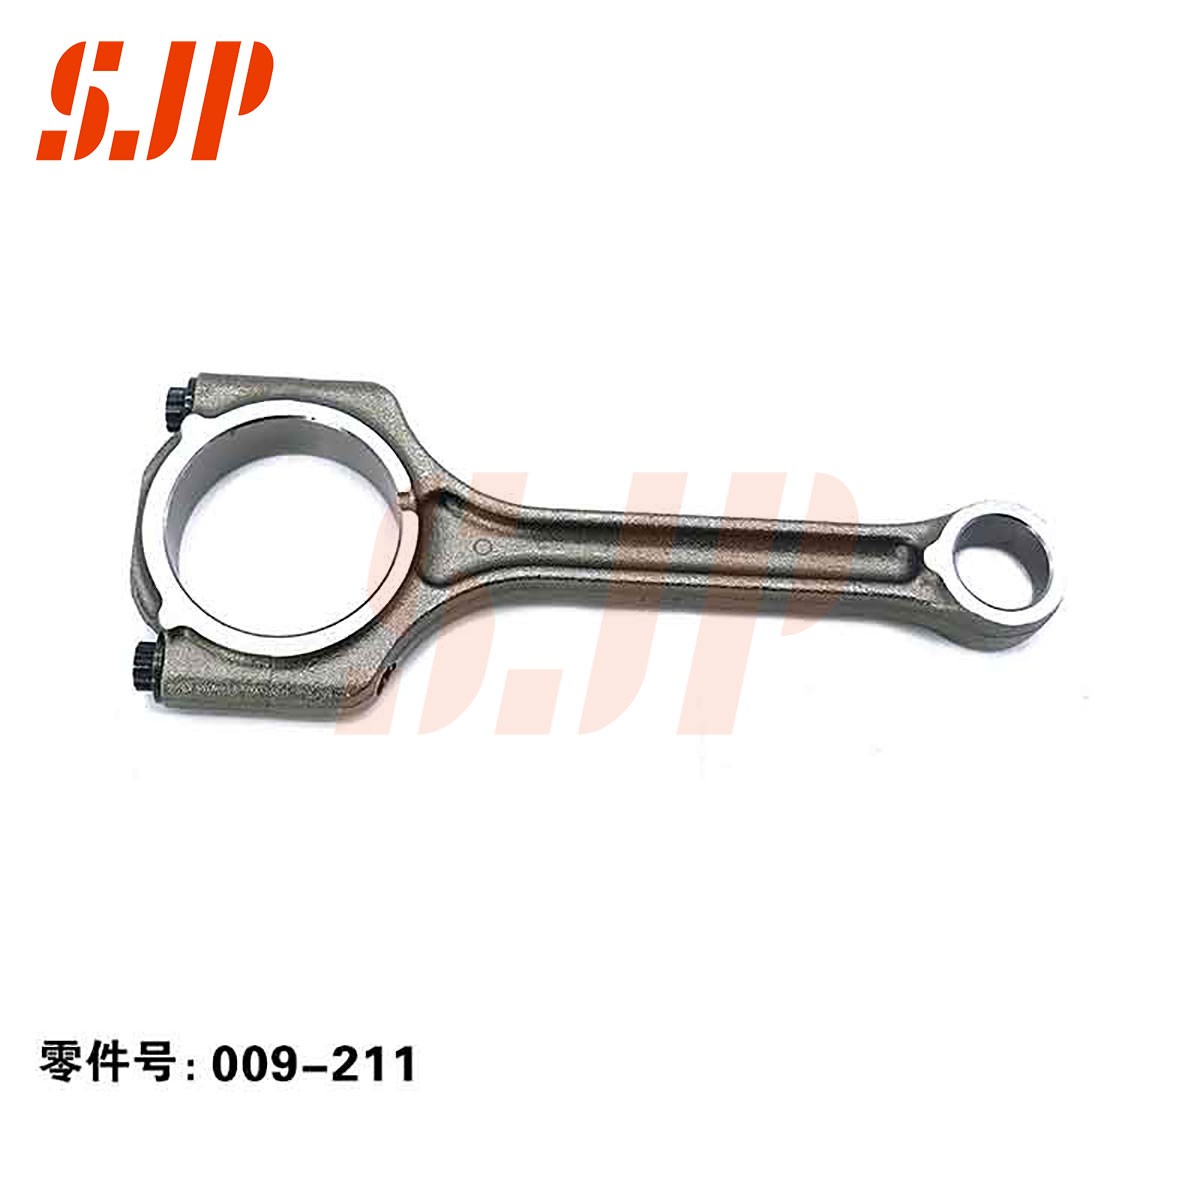 SJ-009-211 Connecting Rod For SFG16C